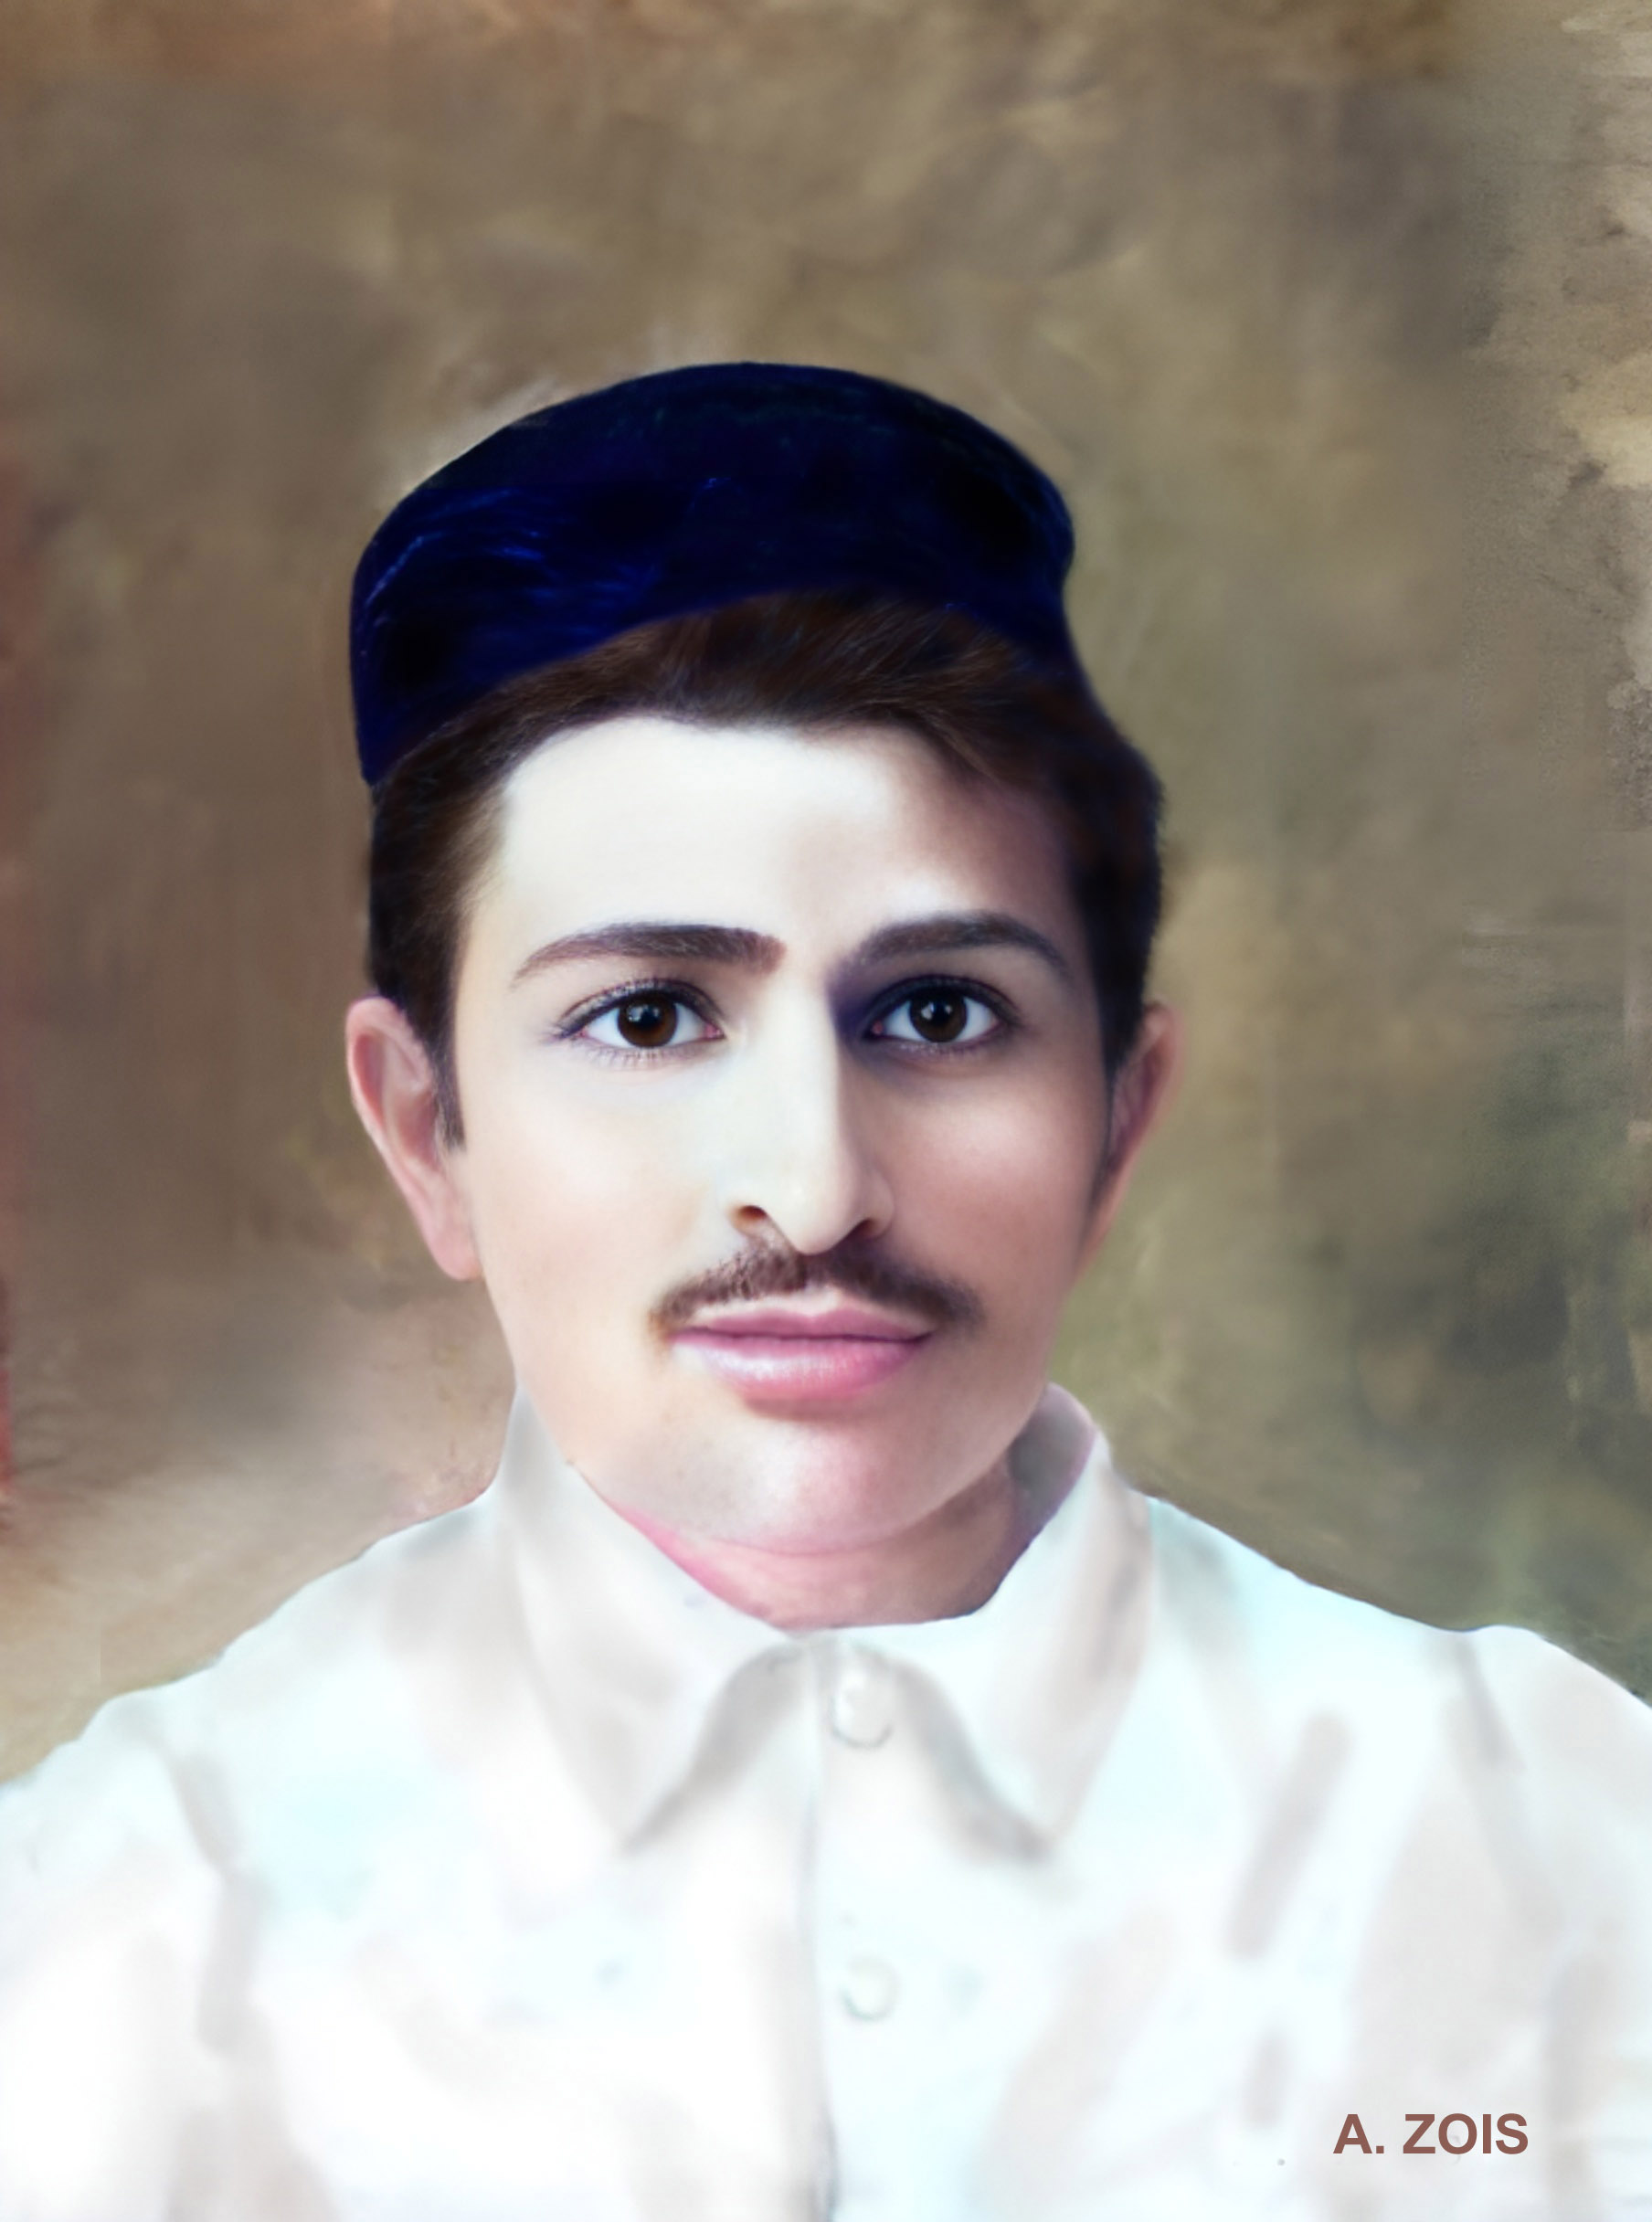 Merwan Irani - Dec. 1915  Poona. Image trimmed, enhanced & rendered by Anthony Zois.